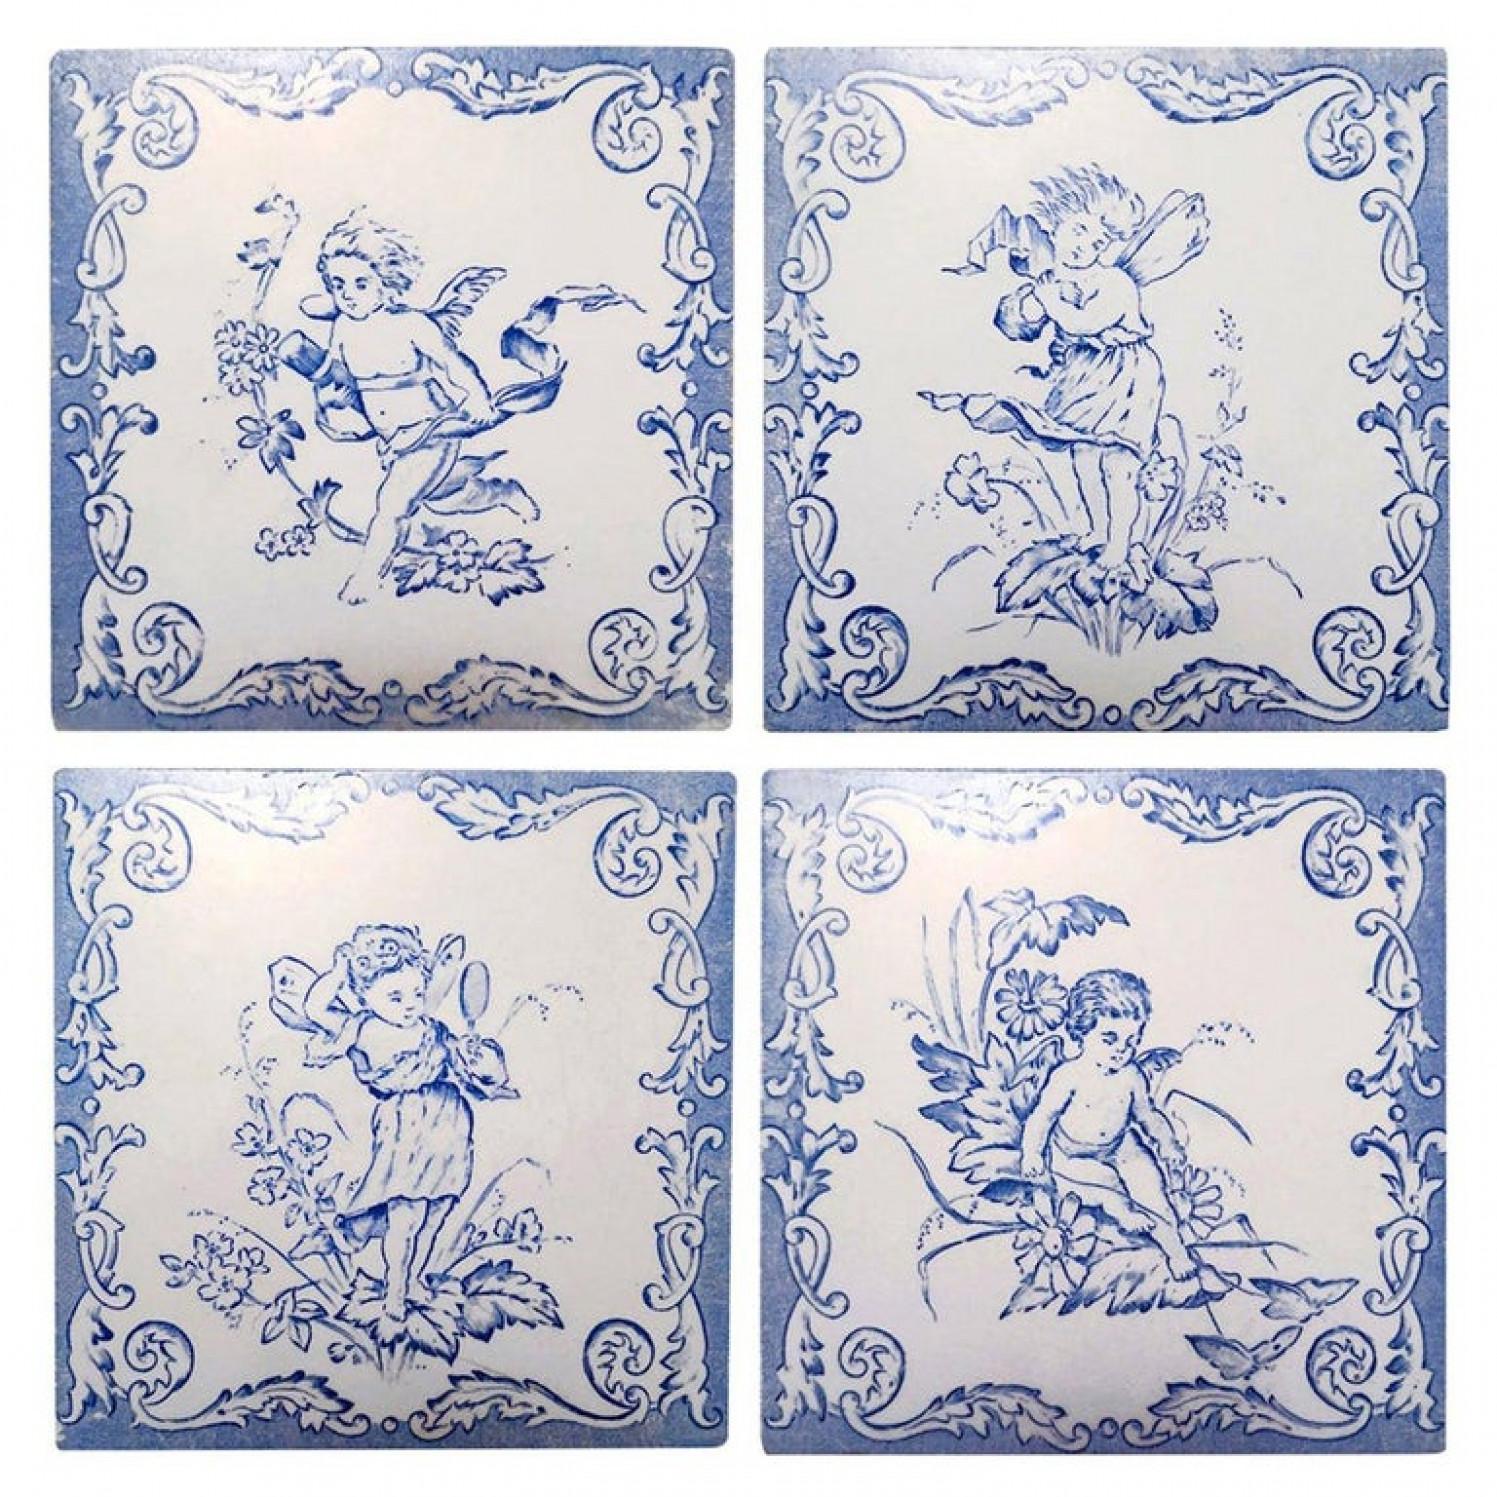 This is an amazing set of 4 handmade tiles with 4 different stylized angel/putti designs in very light blue with white back ground. Manufactured around 1930 in Hasselt 